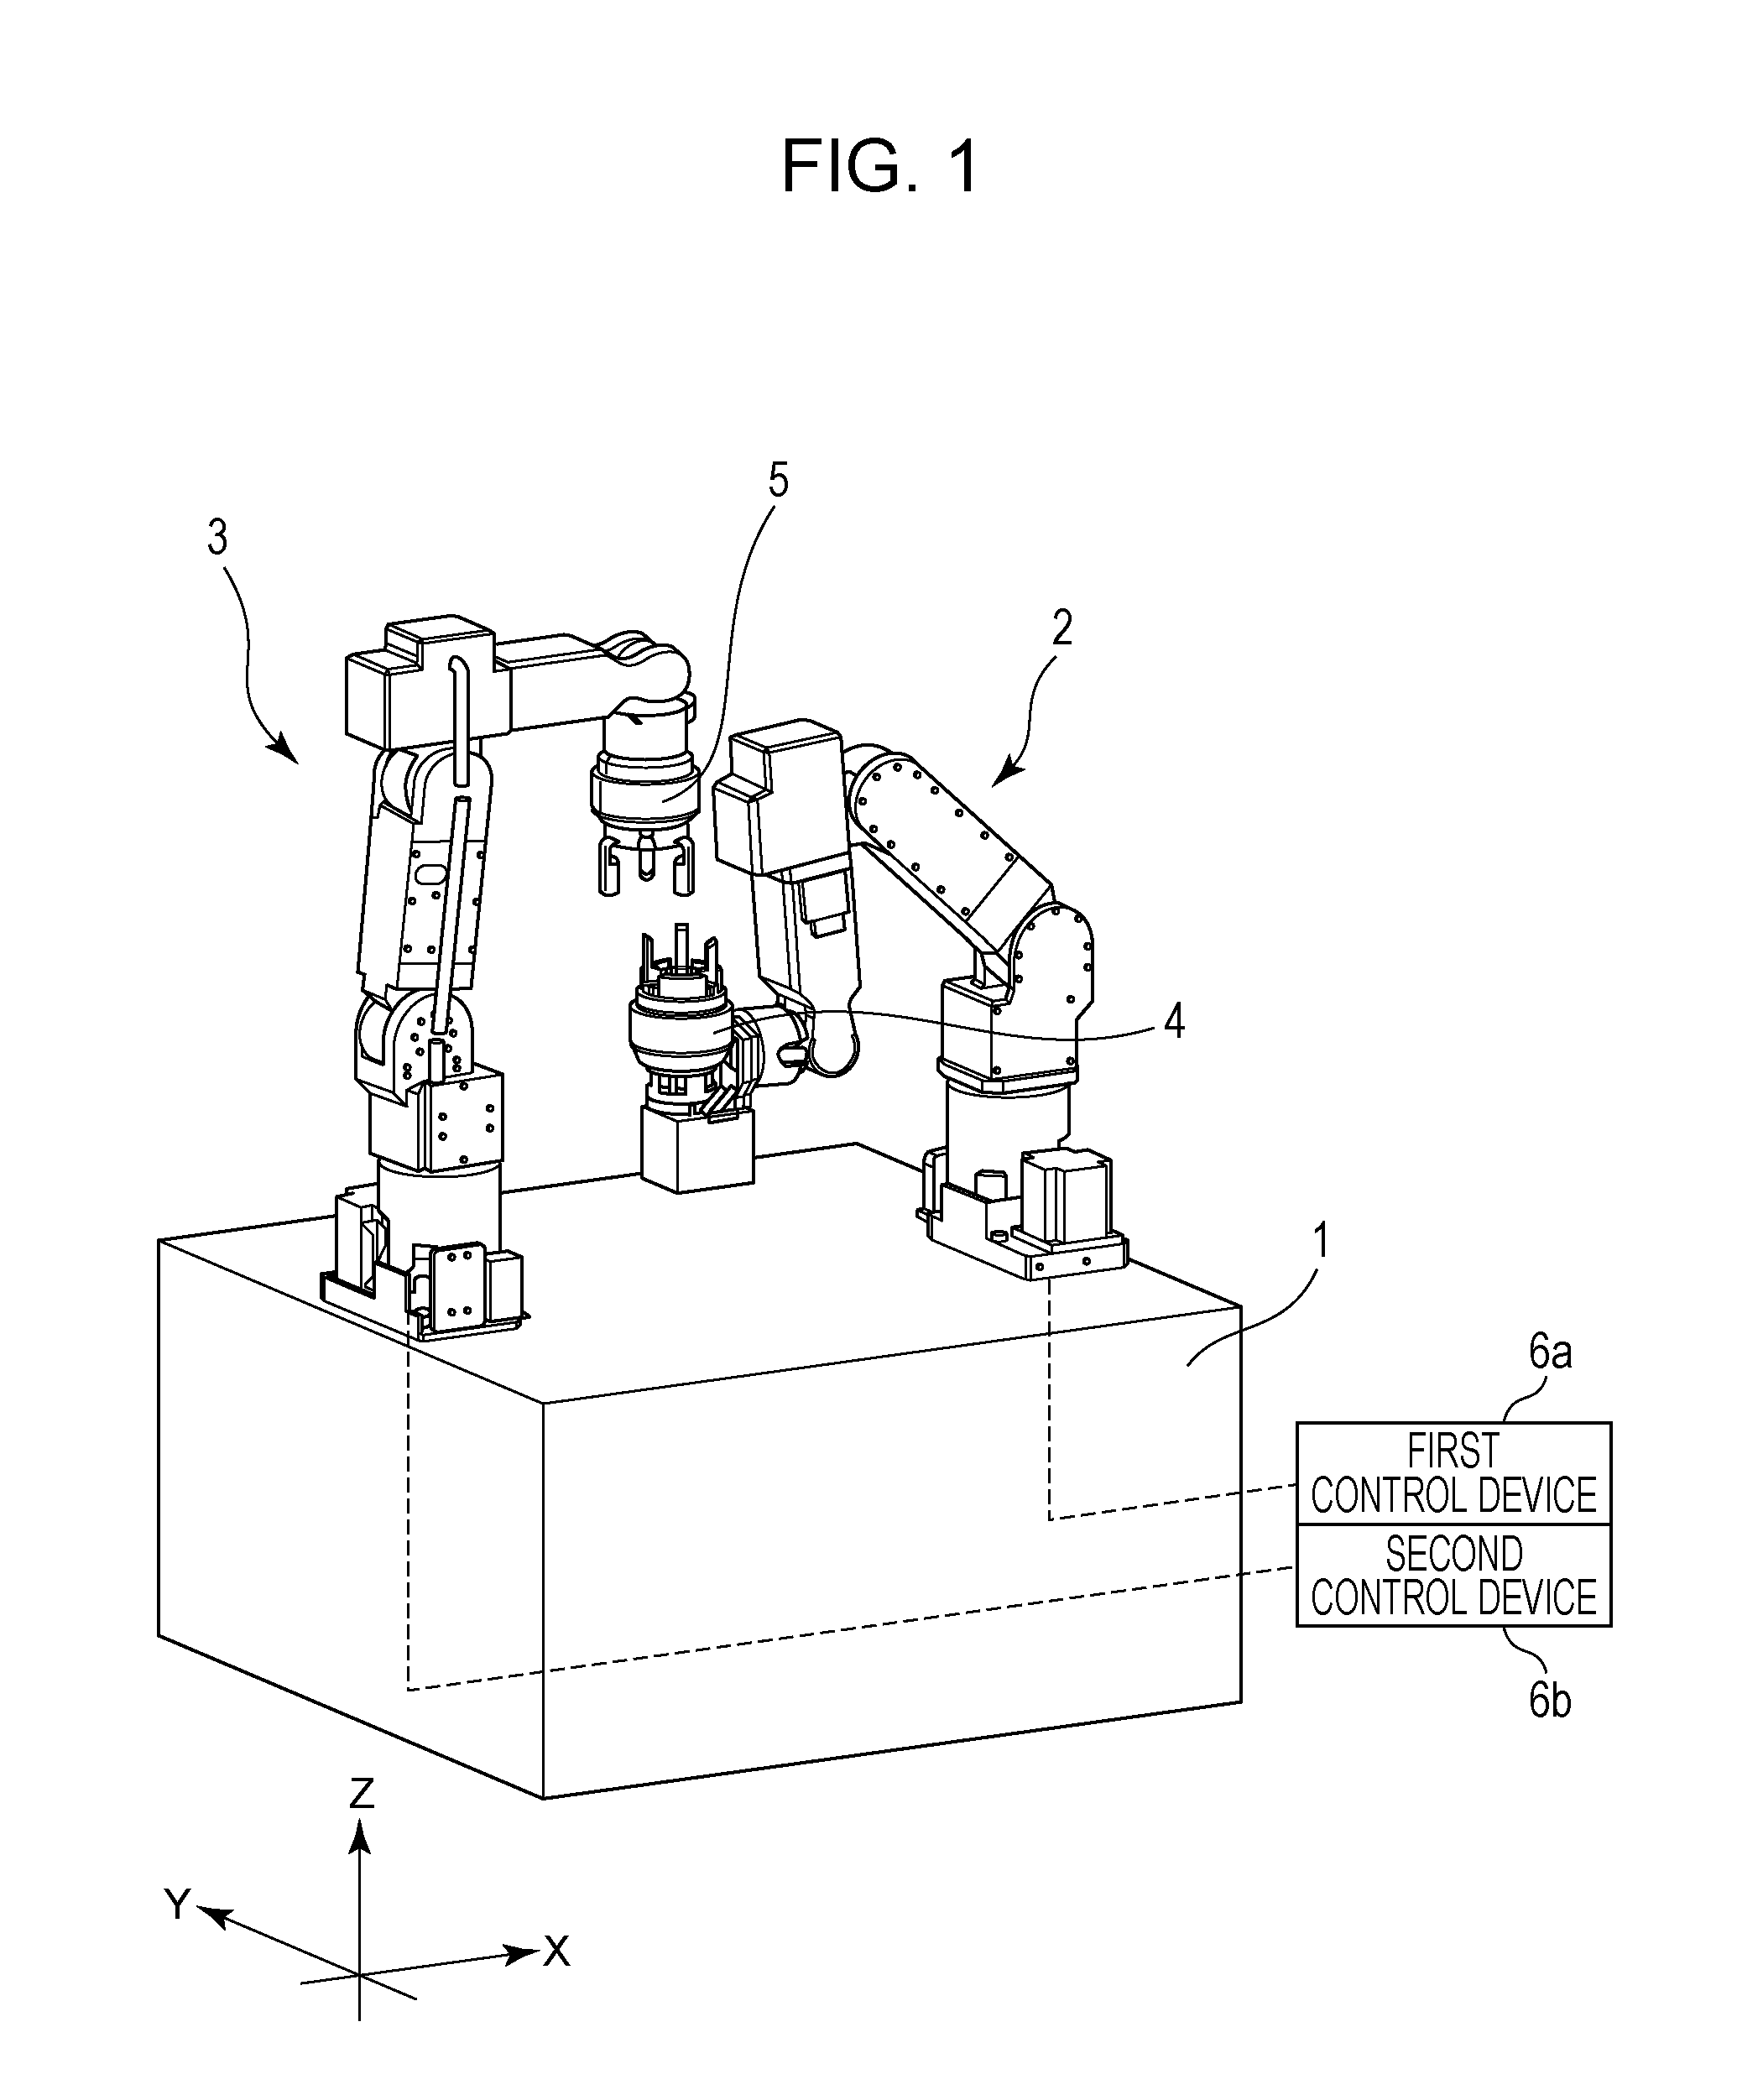 Assembly equipment and assembly method